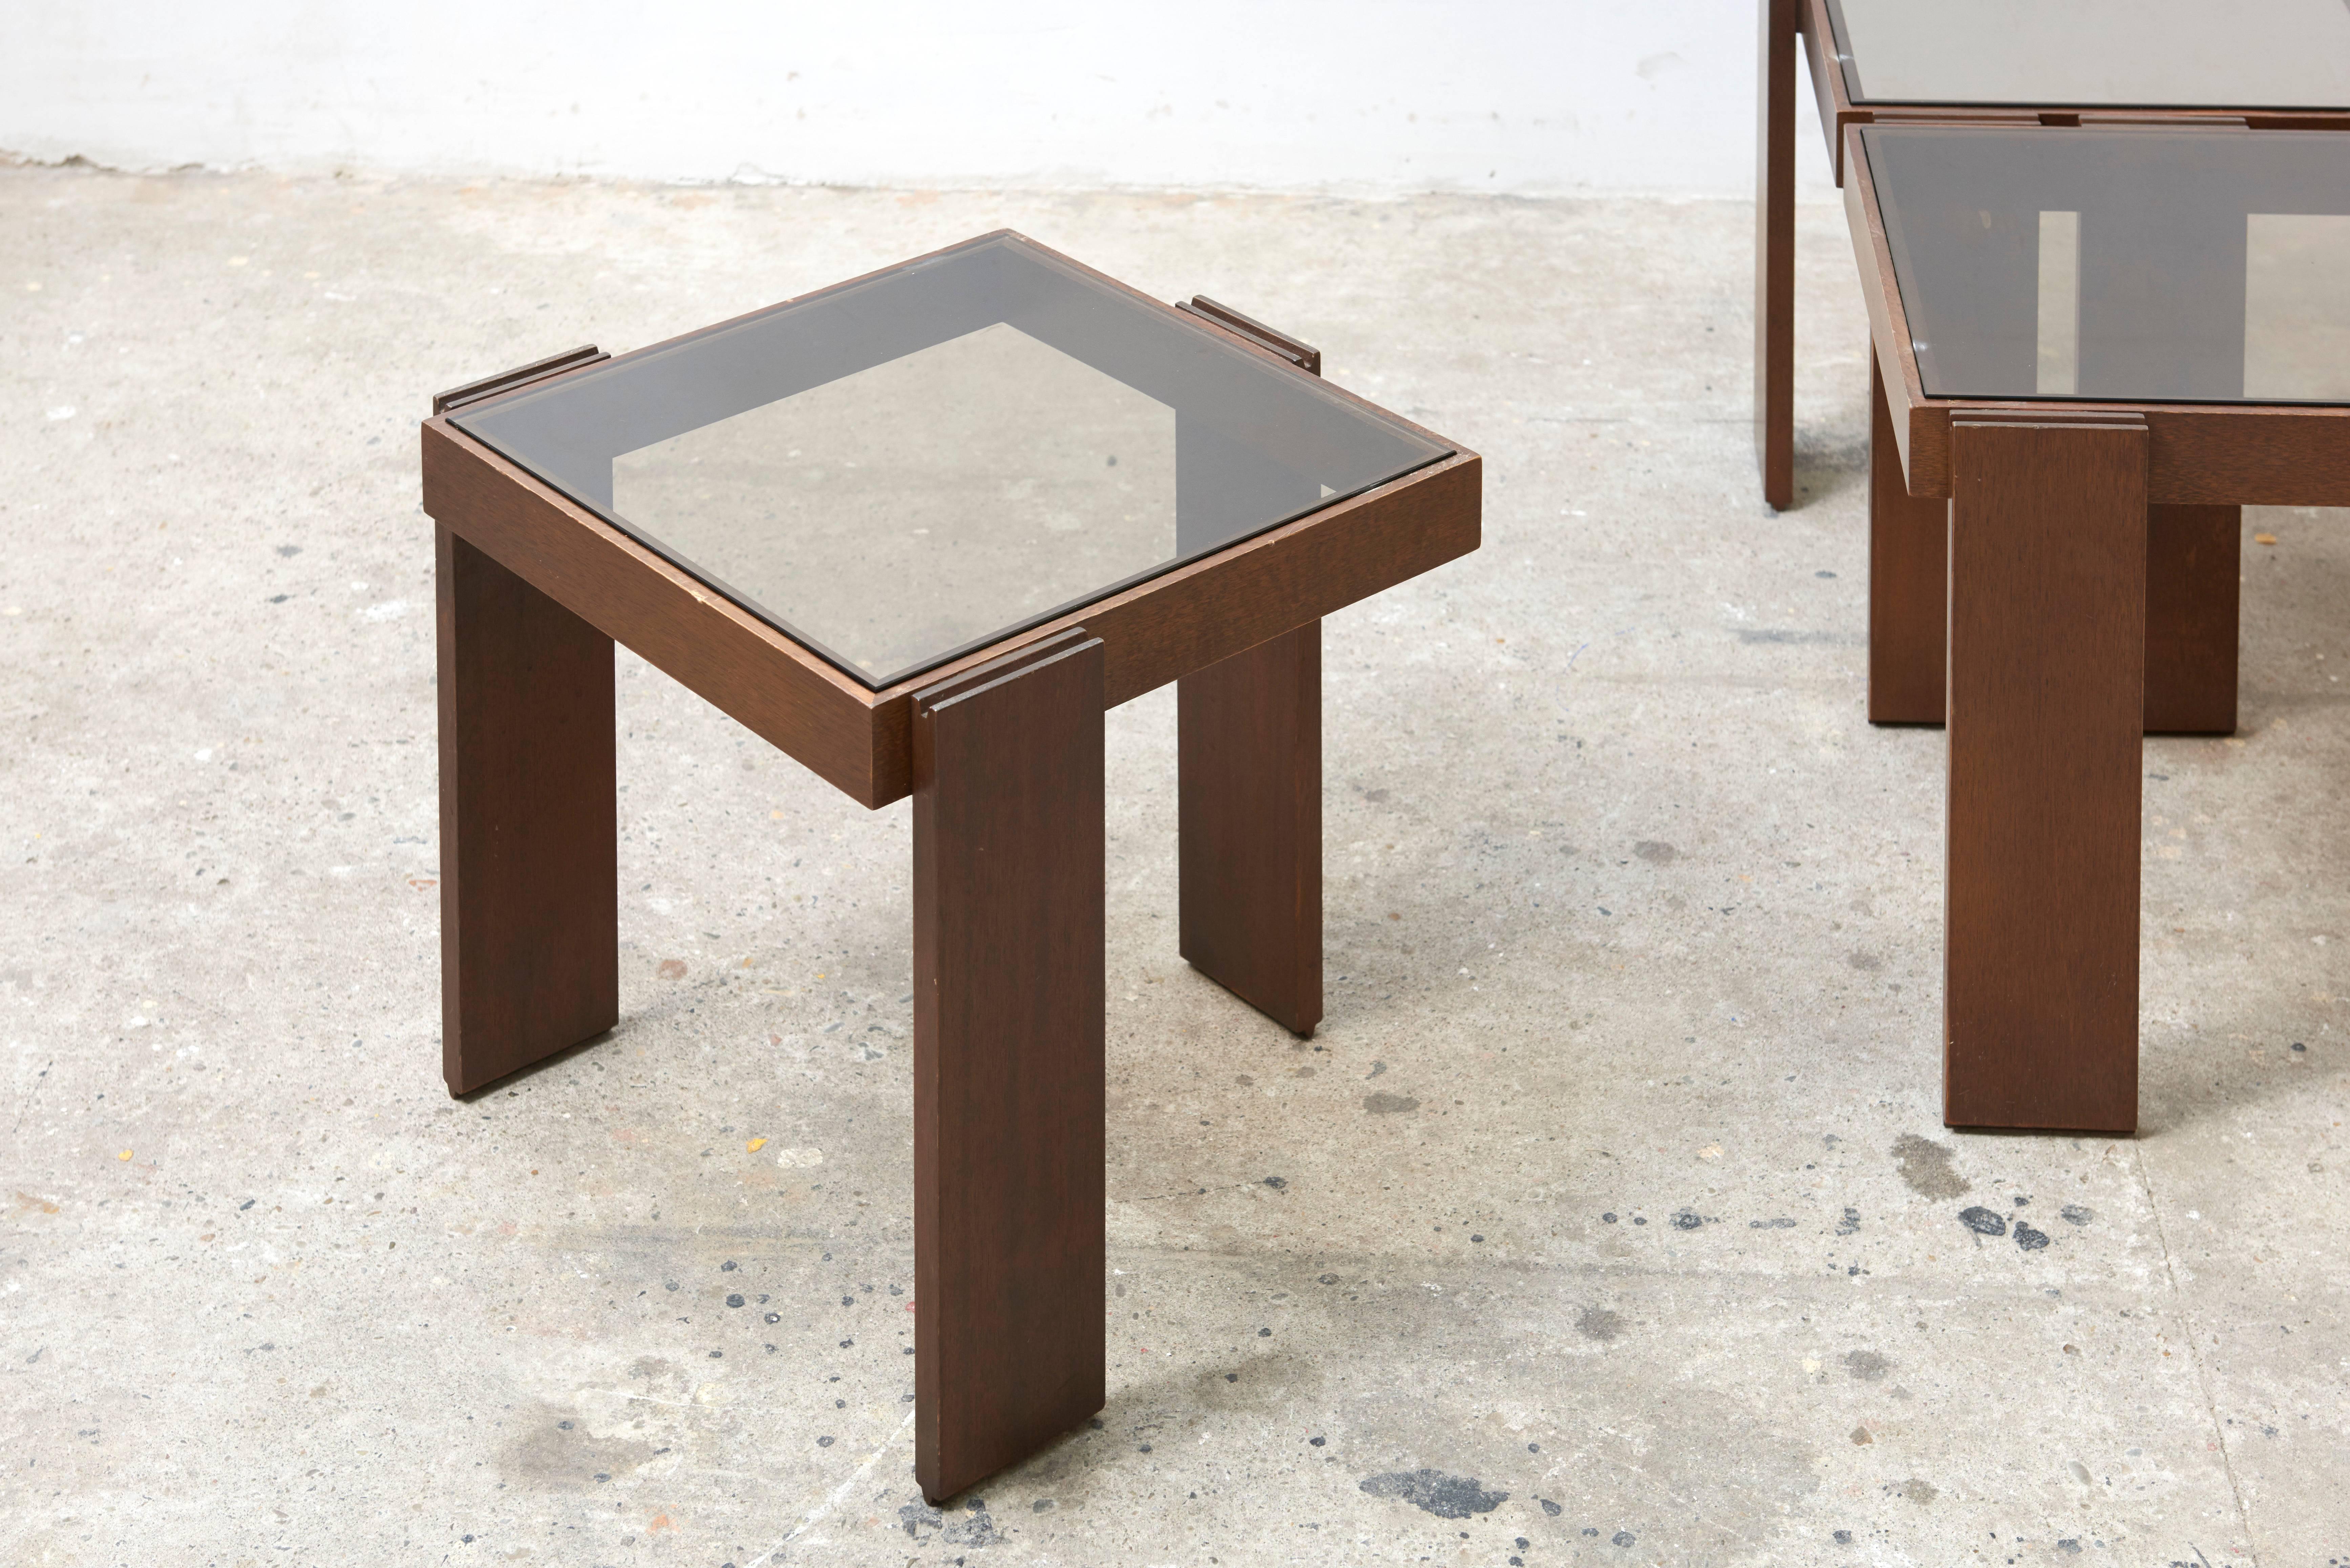 Mid-20th Century Modular Stackable Solid Wood Coffee, Side Tables by Frattini for Cassina For Sale